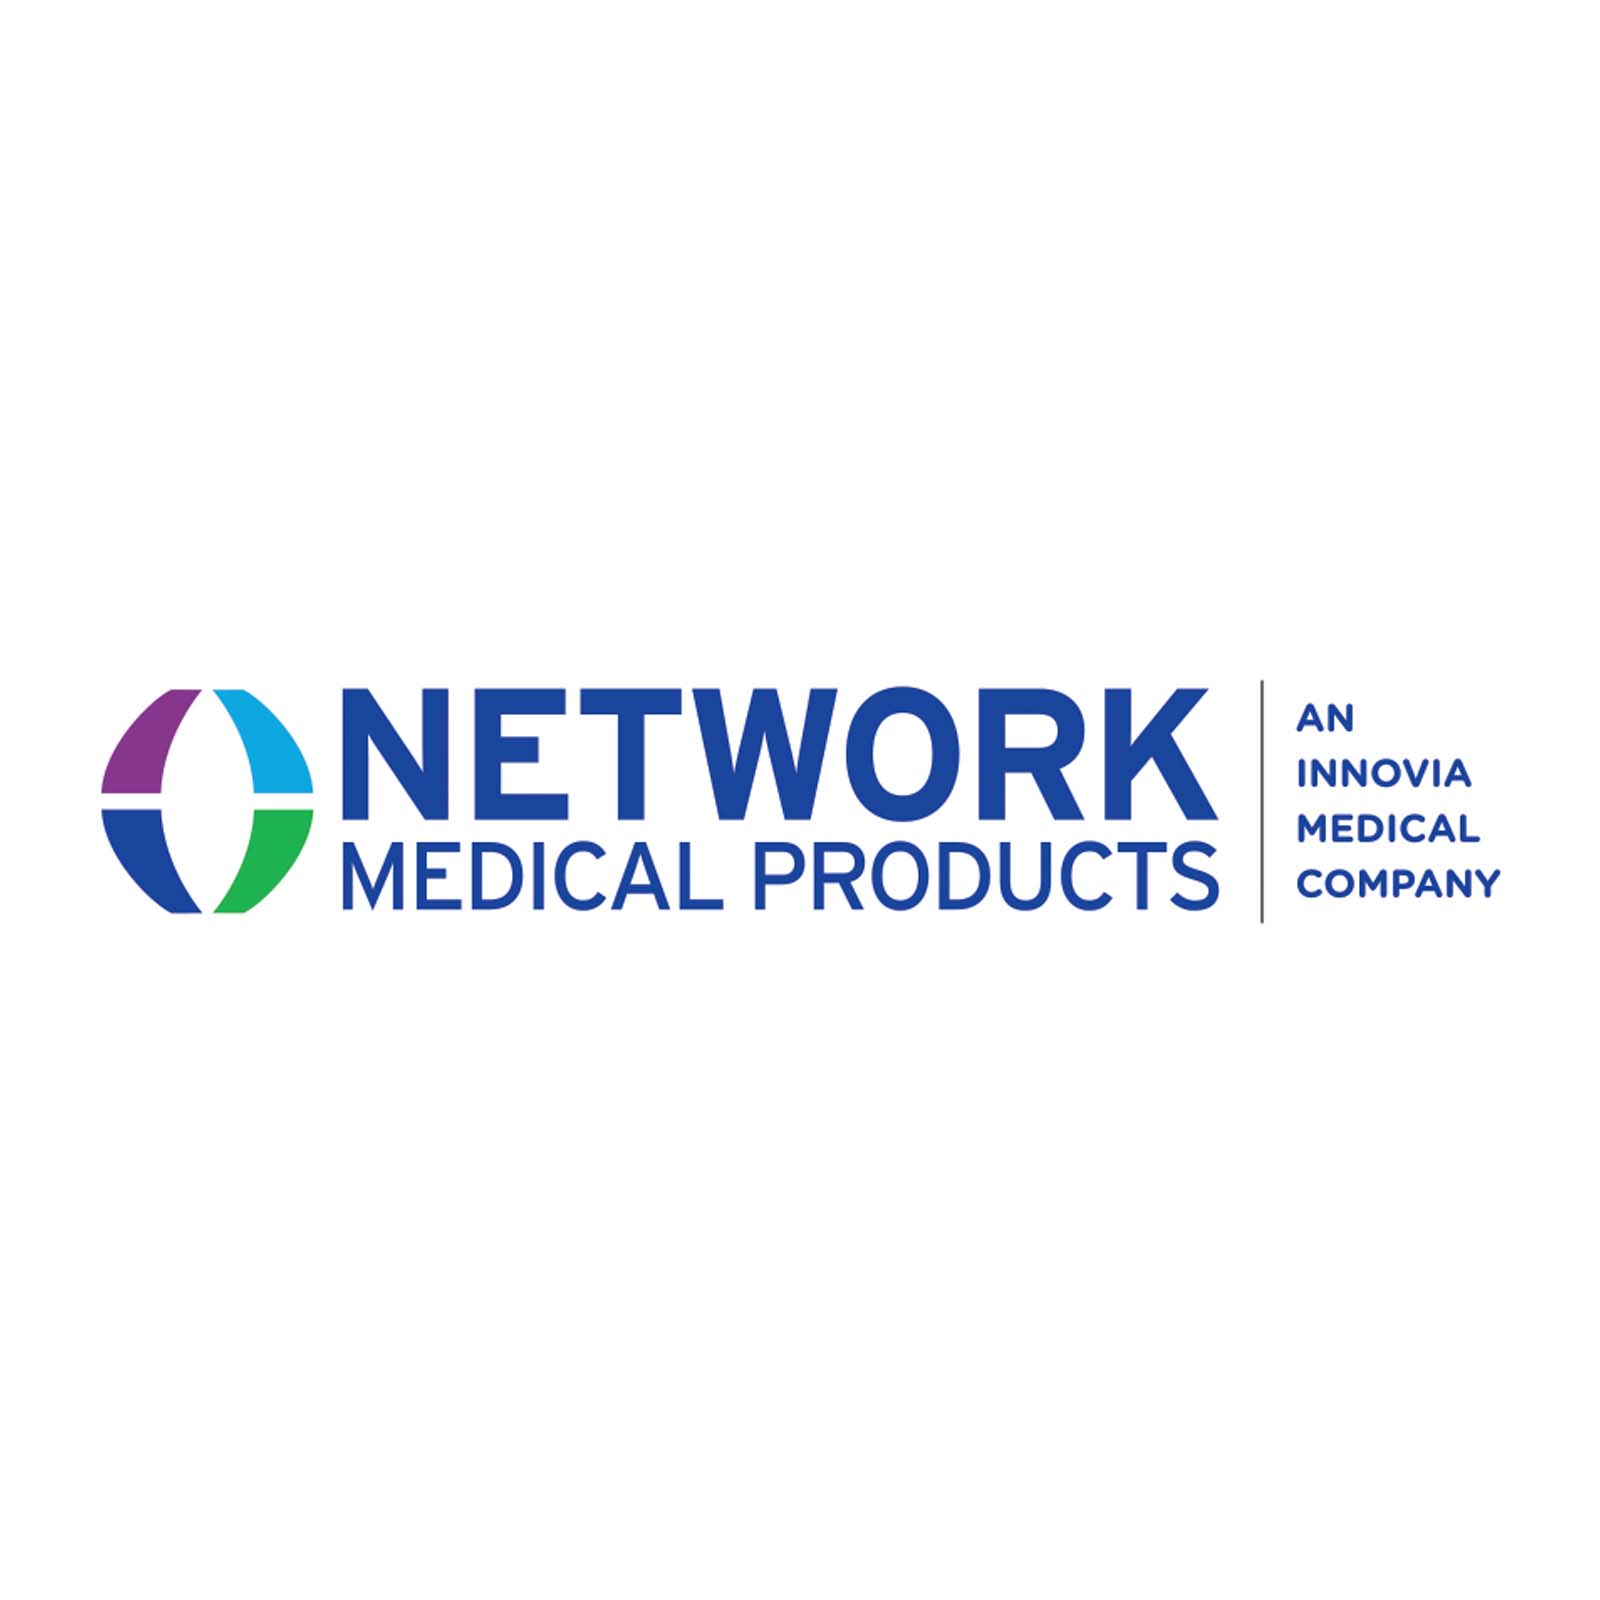 Network Medical Products Ltd. [33162]